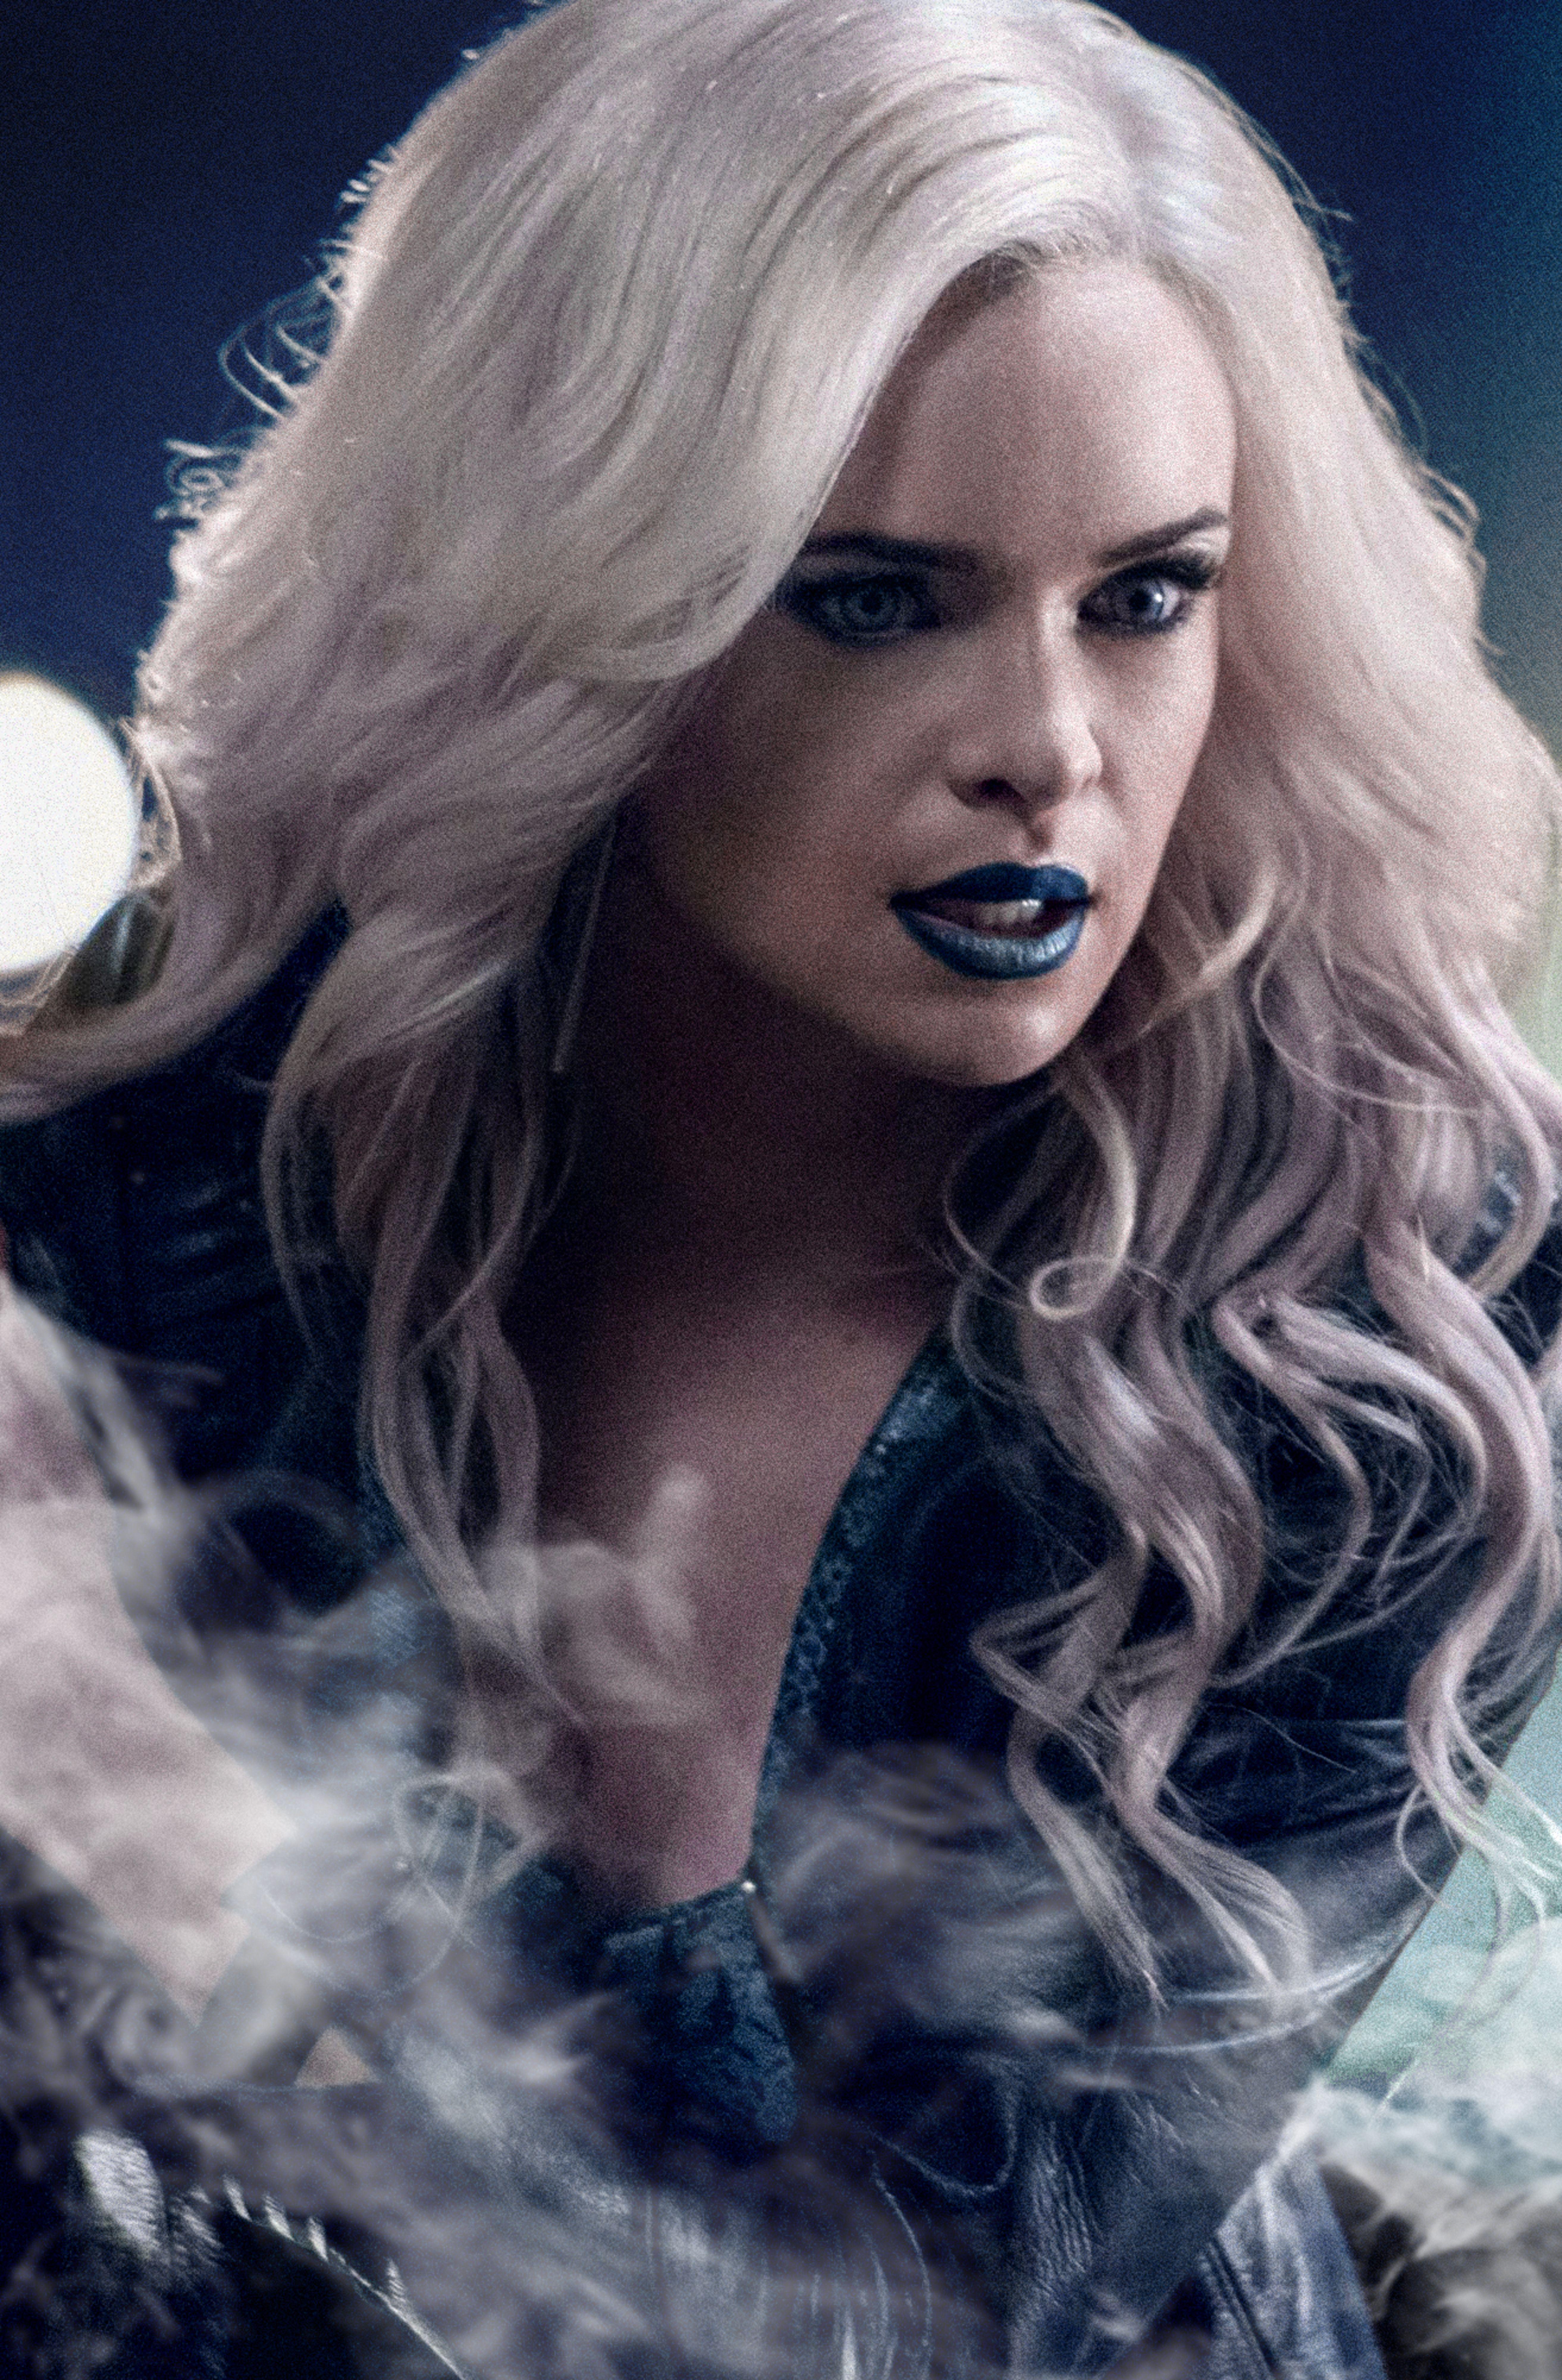 Most viewed Killer Frost wallpapers.